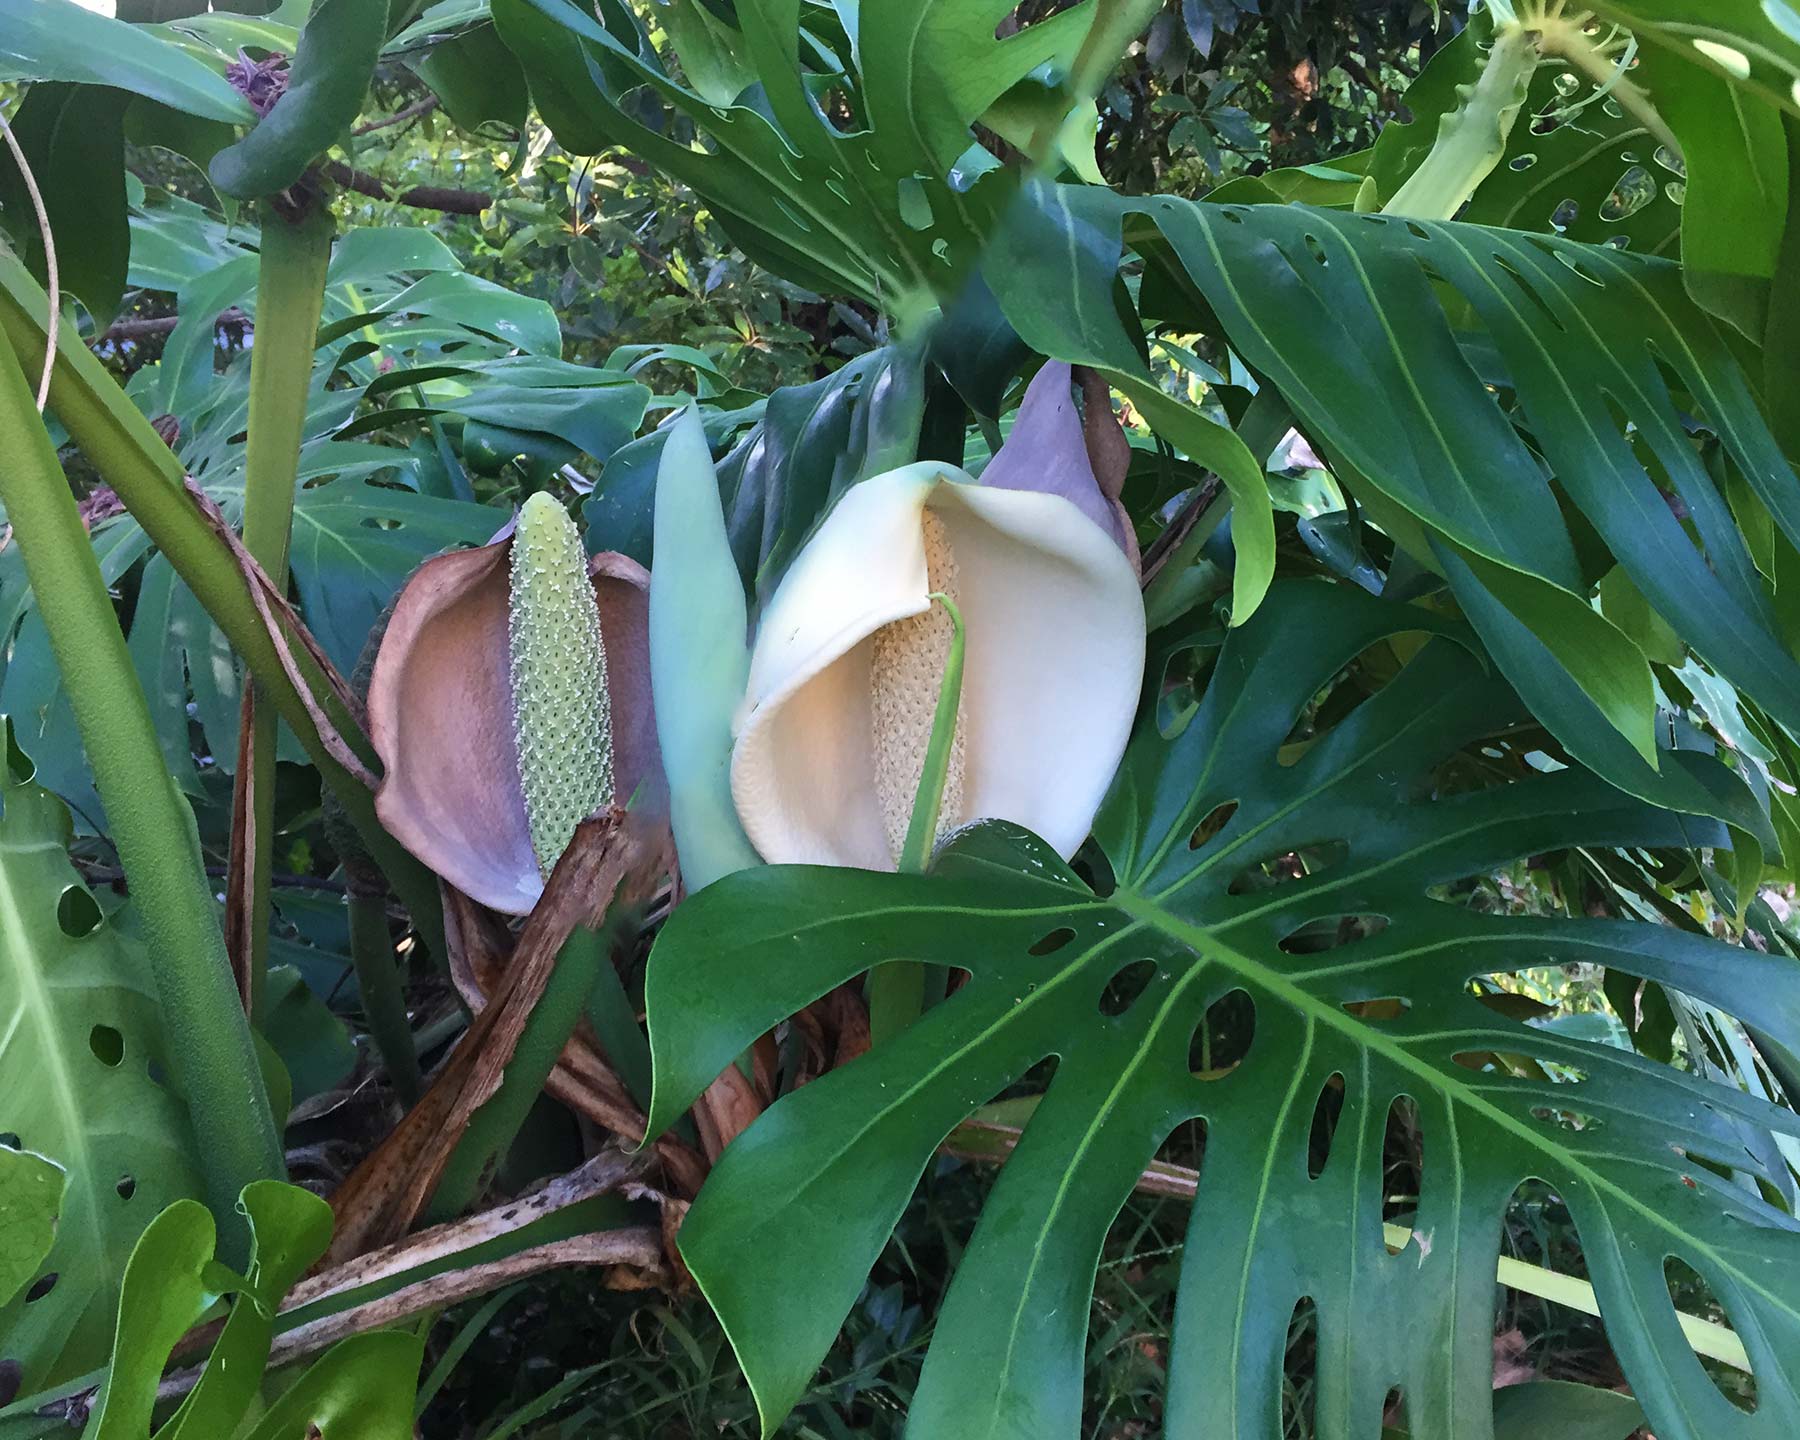 Monstera deliciosa - the flower is a creamy spike surrounded by a white spathe and an immature fruit.